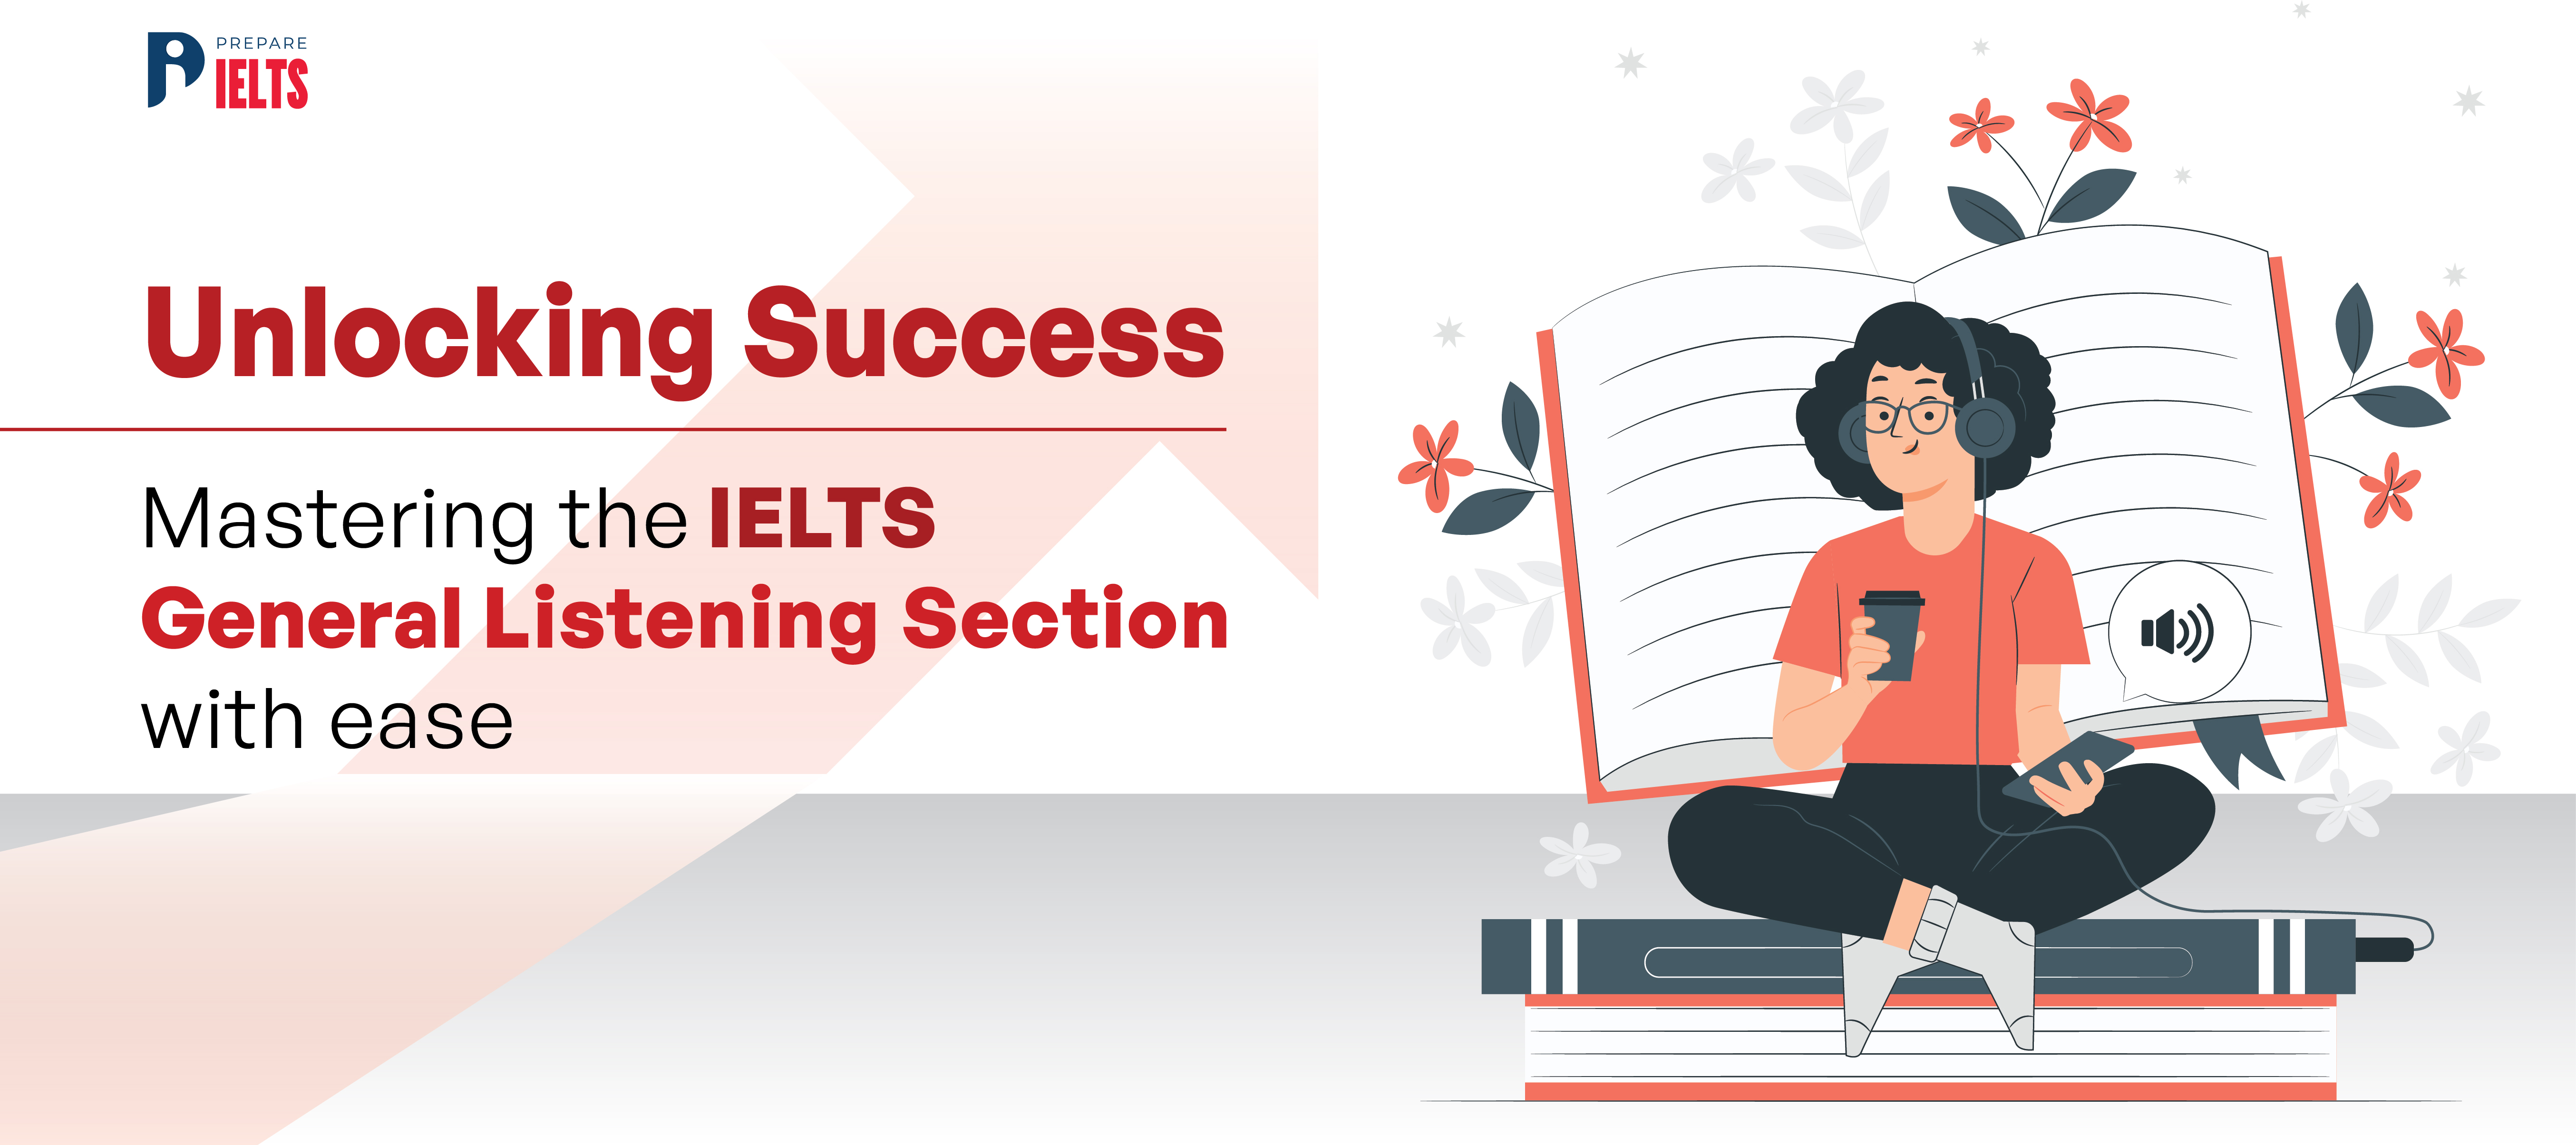 mastering-the-ielts-general-listening-section-with-ease.jpg